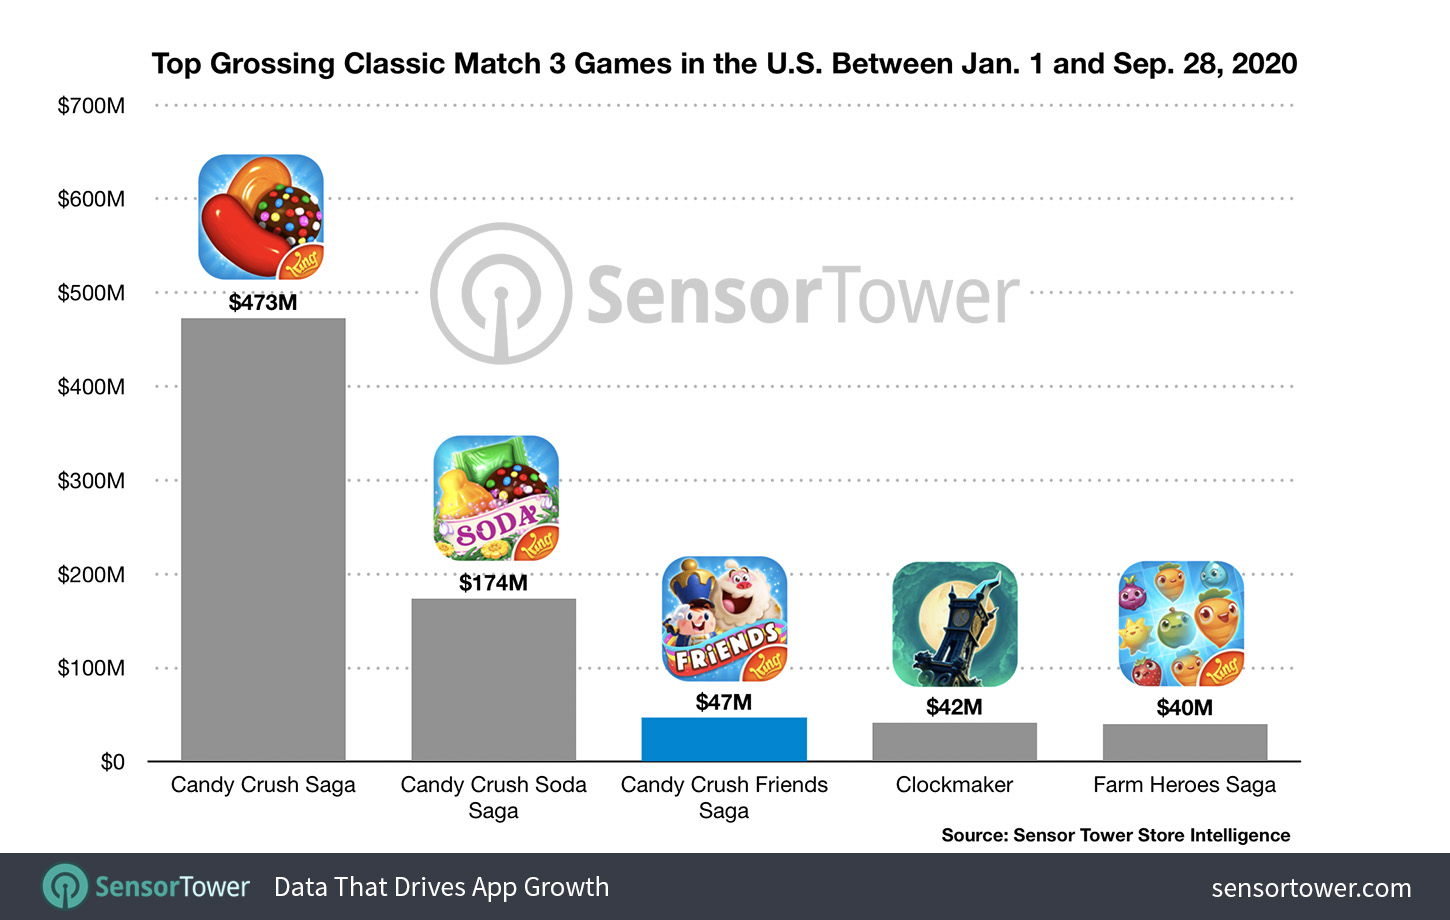 How much money does Candy Crush make?